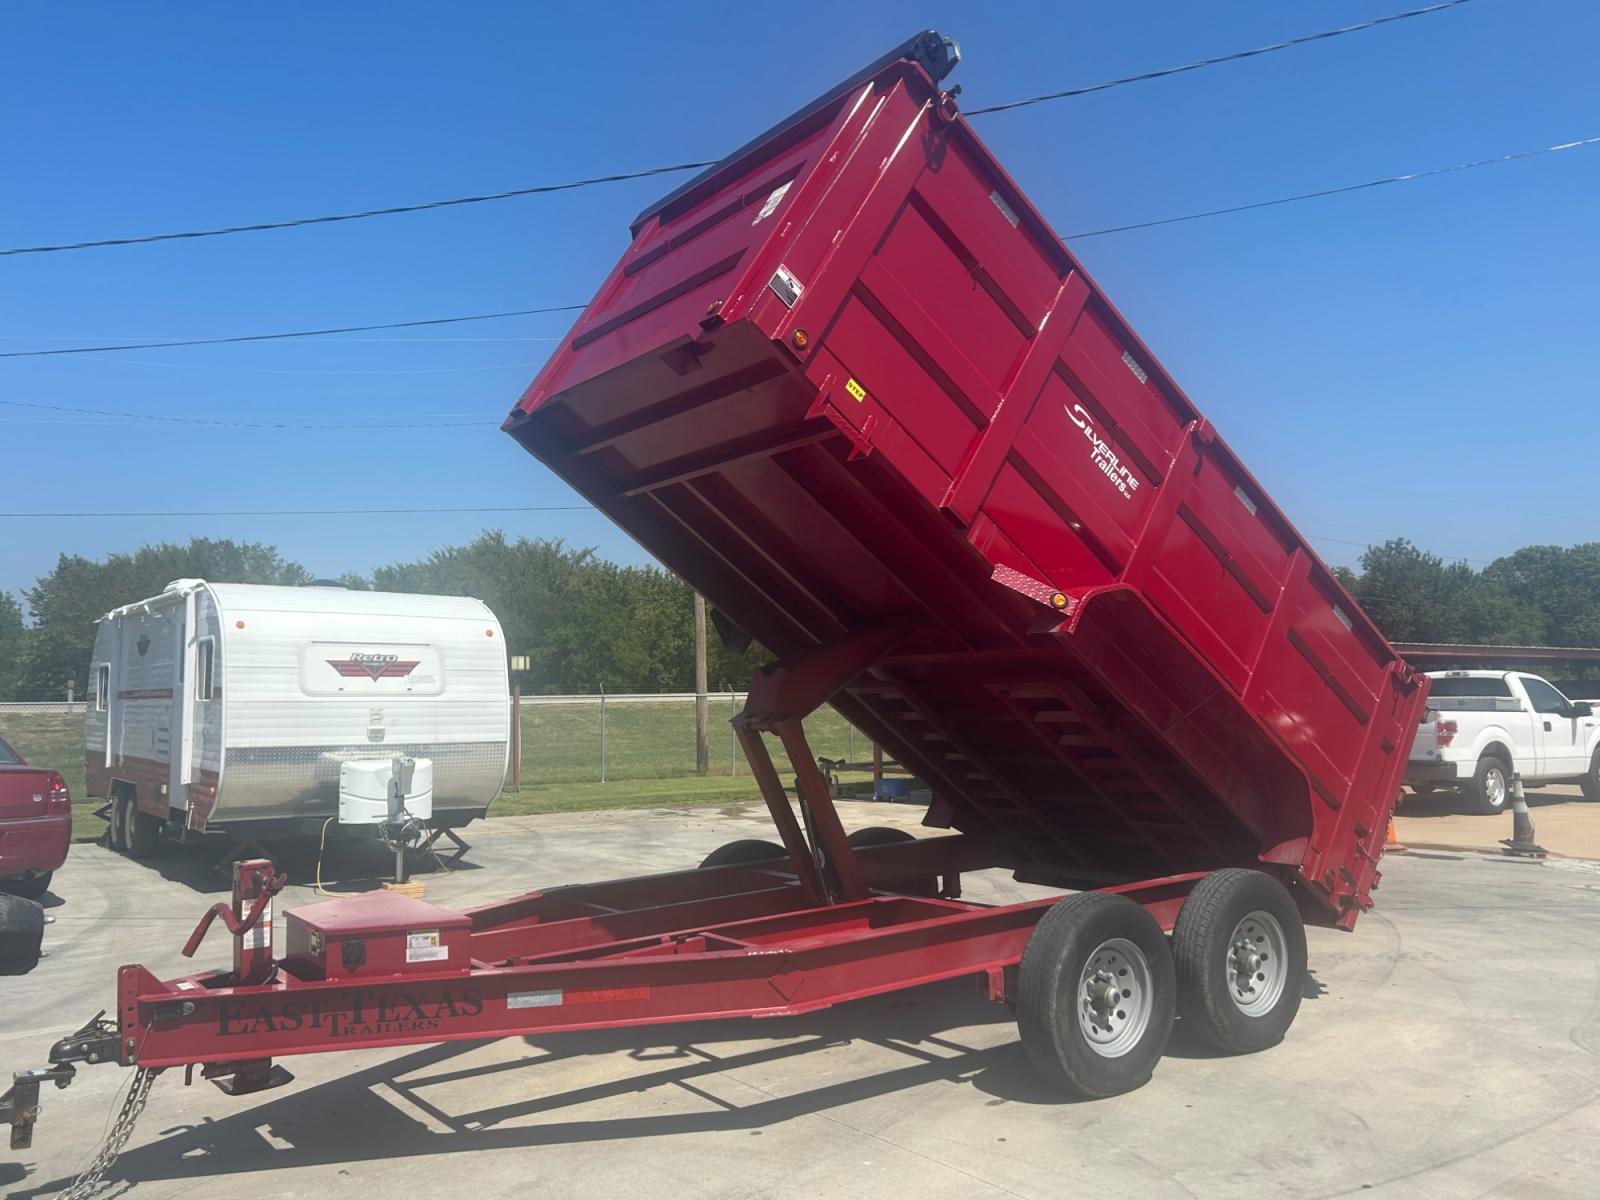 2022 RED EAST TEXAS TRAILER DUMPBED (58SBD1420NE) , located at 17760 Hwy 62, Morris, OK, 74445, 35.609104, -95.877060 - 2022 SILVERLINE TRAILER 83X14 FEATURES 2 7,000 LB DEXTER SPRING AXLES, 2 ELEC FSA BRAKES, COUPLER 2-5/16" ADJUSTABLE (6 HOLE), DIAMOND PLATE FENDERS, 16" CROSS-MEMBERS, 48" DUMP SIDES, 48" 3 WAY GATE, MESH ROLL TARP SYSTEM, JACK SPRING LOADED DROP LEG, 4 3'' D-RINGS, TOOL BOX IN TONGUE, SCISSOR HOIS - Photo #0